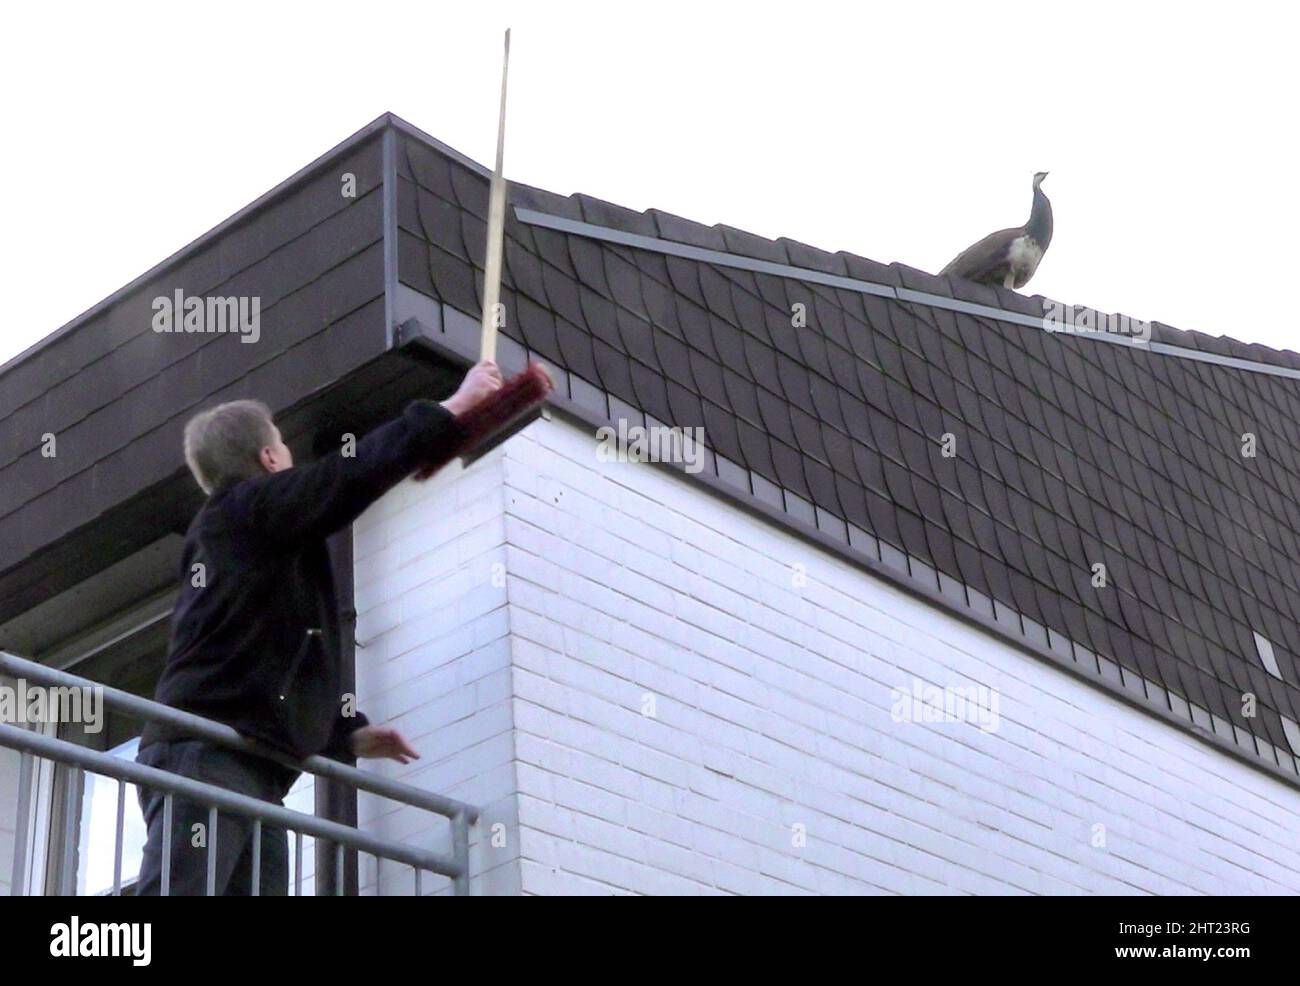 Grevenbroich, Germany. 26th Feb, 2022. A peacock perches on the roof of an apartment building. The hunt through gardens, bushes and garage yards for a runaway peacock kept the fire department busy for days. Together with the 'animal emergency call' succeeded on Saturday to catch the peacock unharmed. (to dpa 'Fire brigade delivers itself hours-long catching game with escaped peacock') Credit: Dieter Staniek/dpa/Alamy Live News Stock Photo